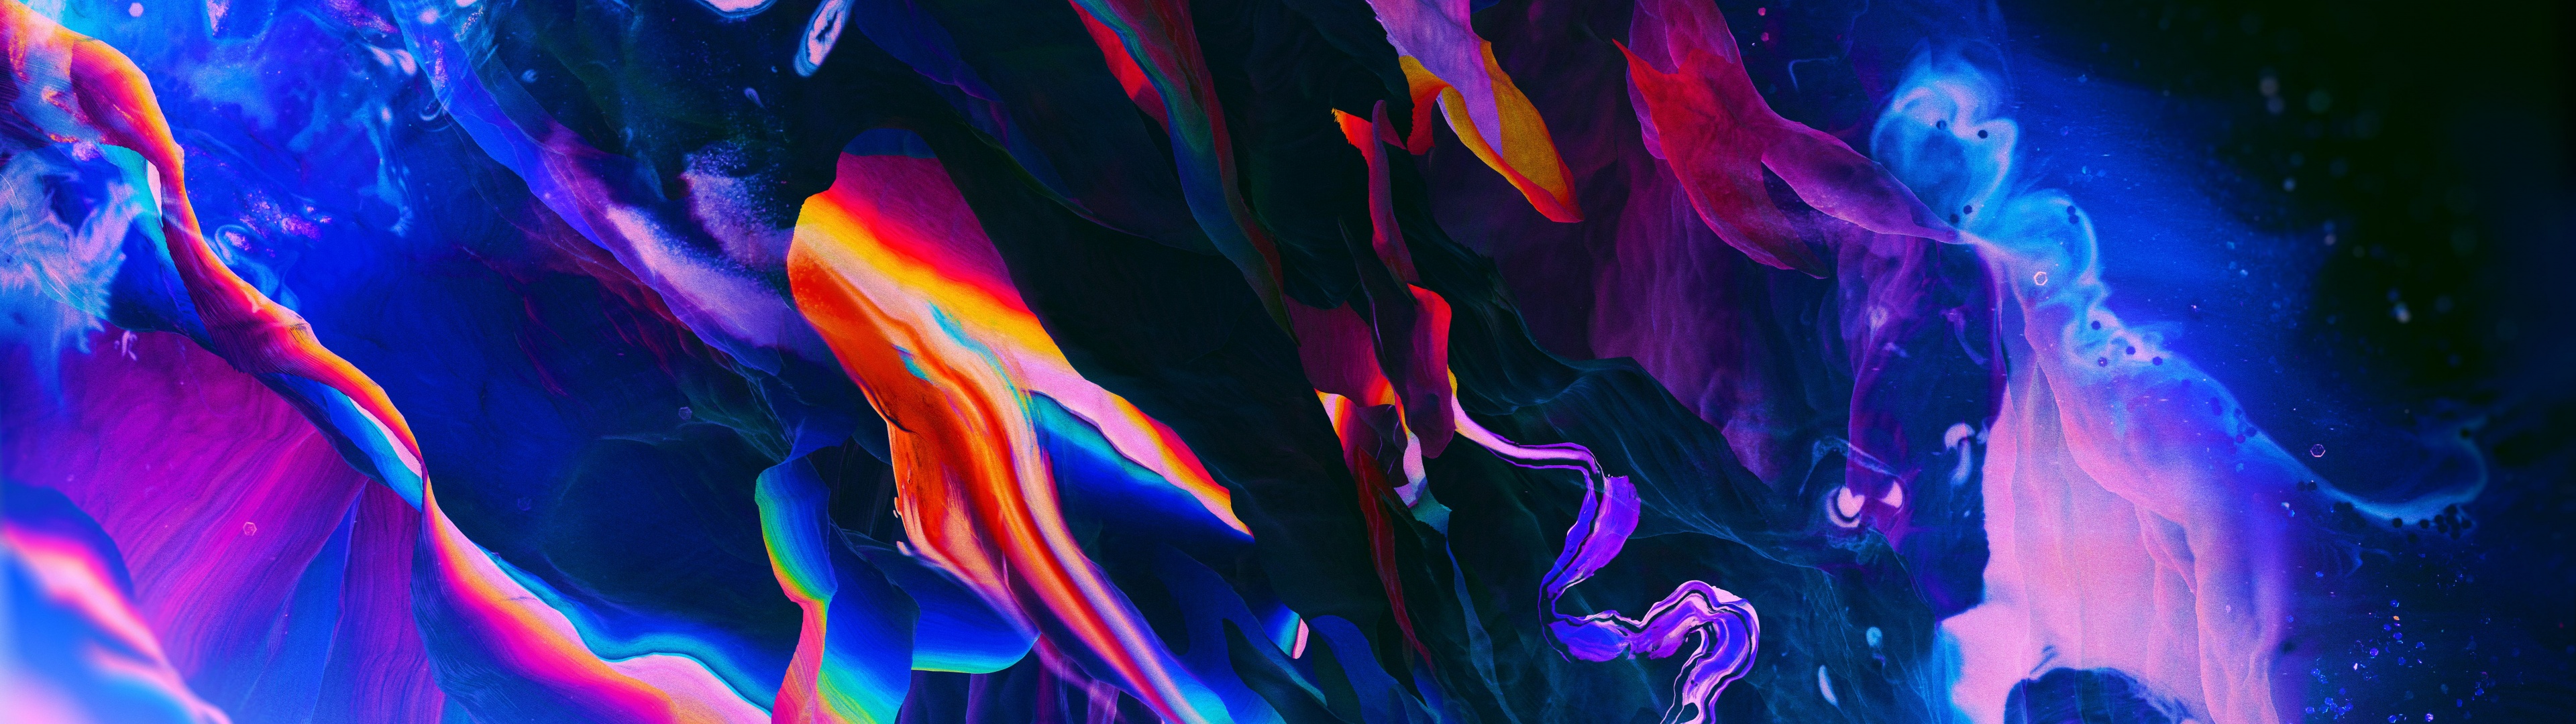 Premium Photo | Colorful abstract wallpapers for iphone and android. this  wallpaper is titled abstract wallpapers.